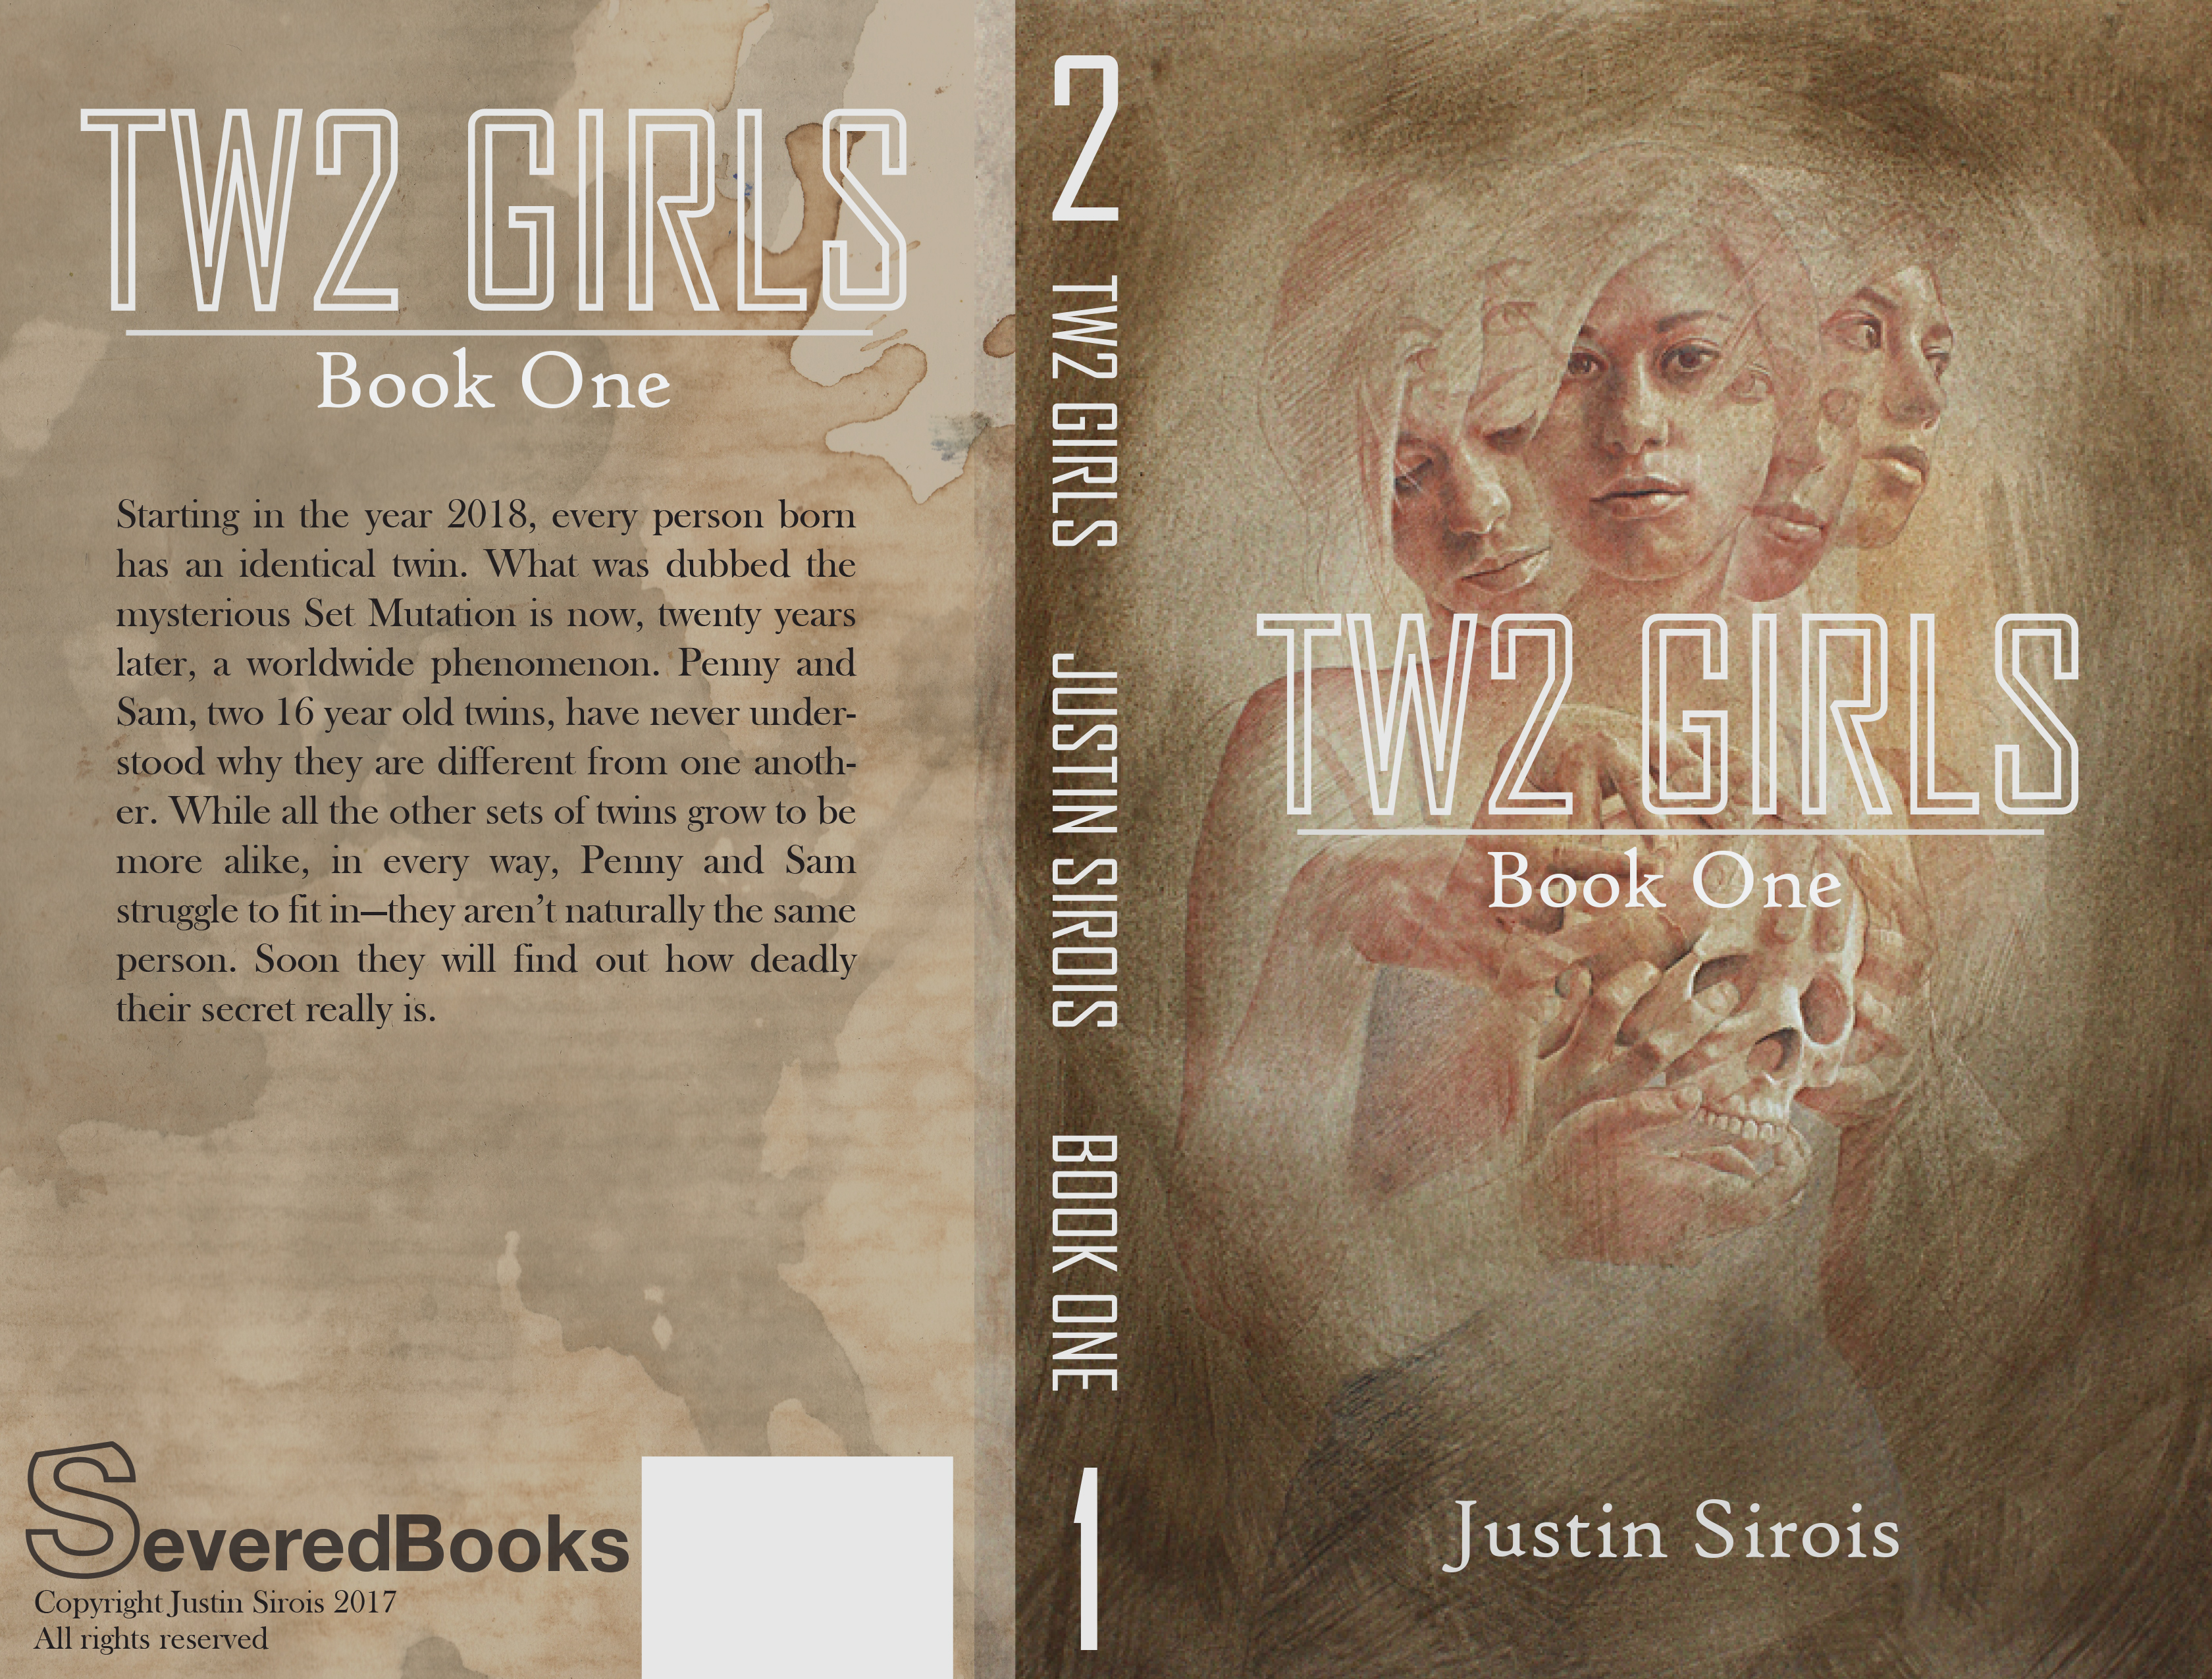 Two Girls paperback layout.